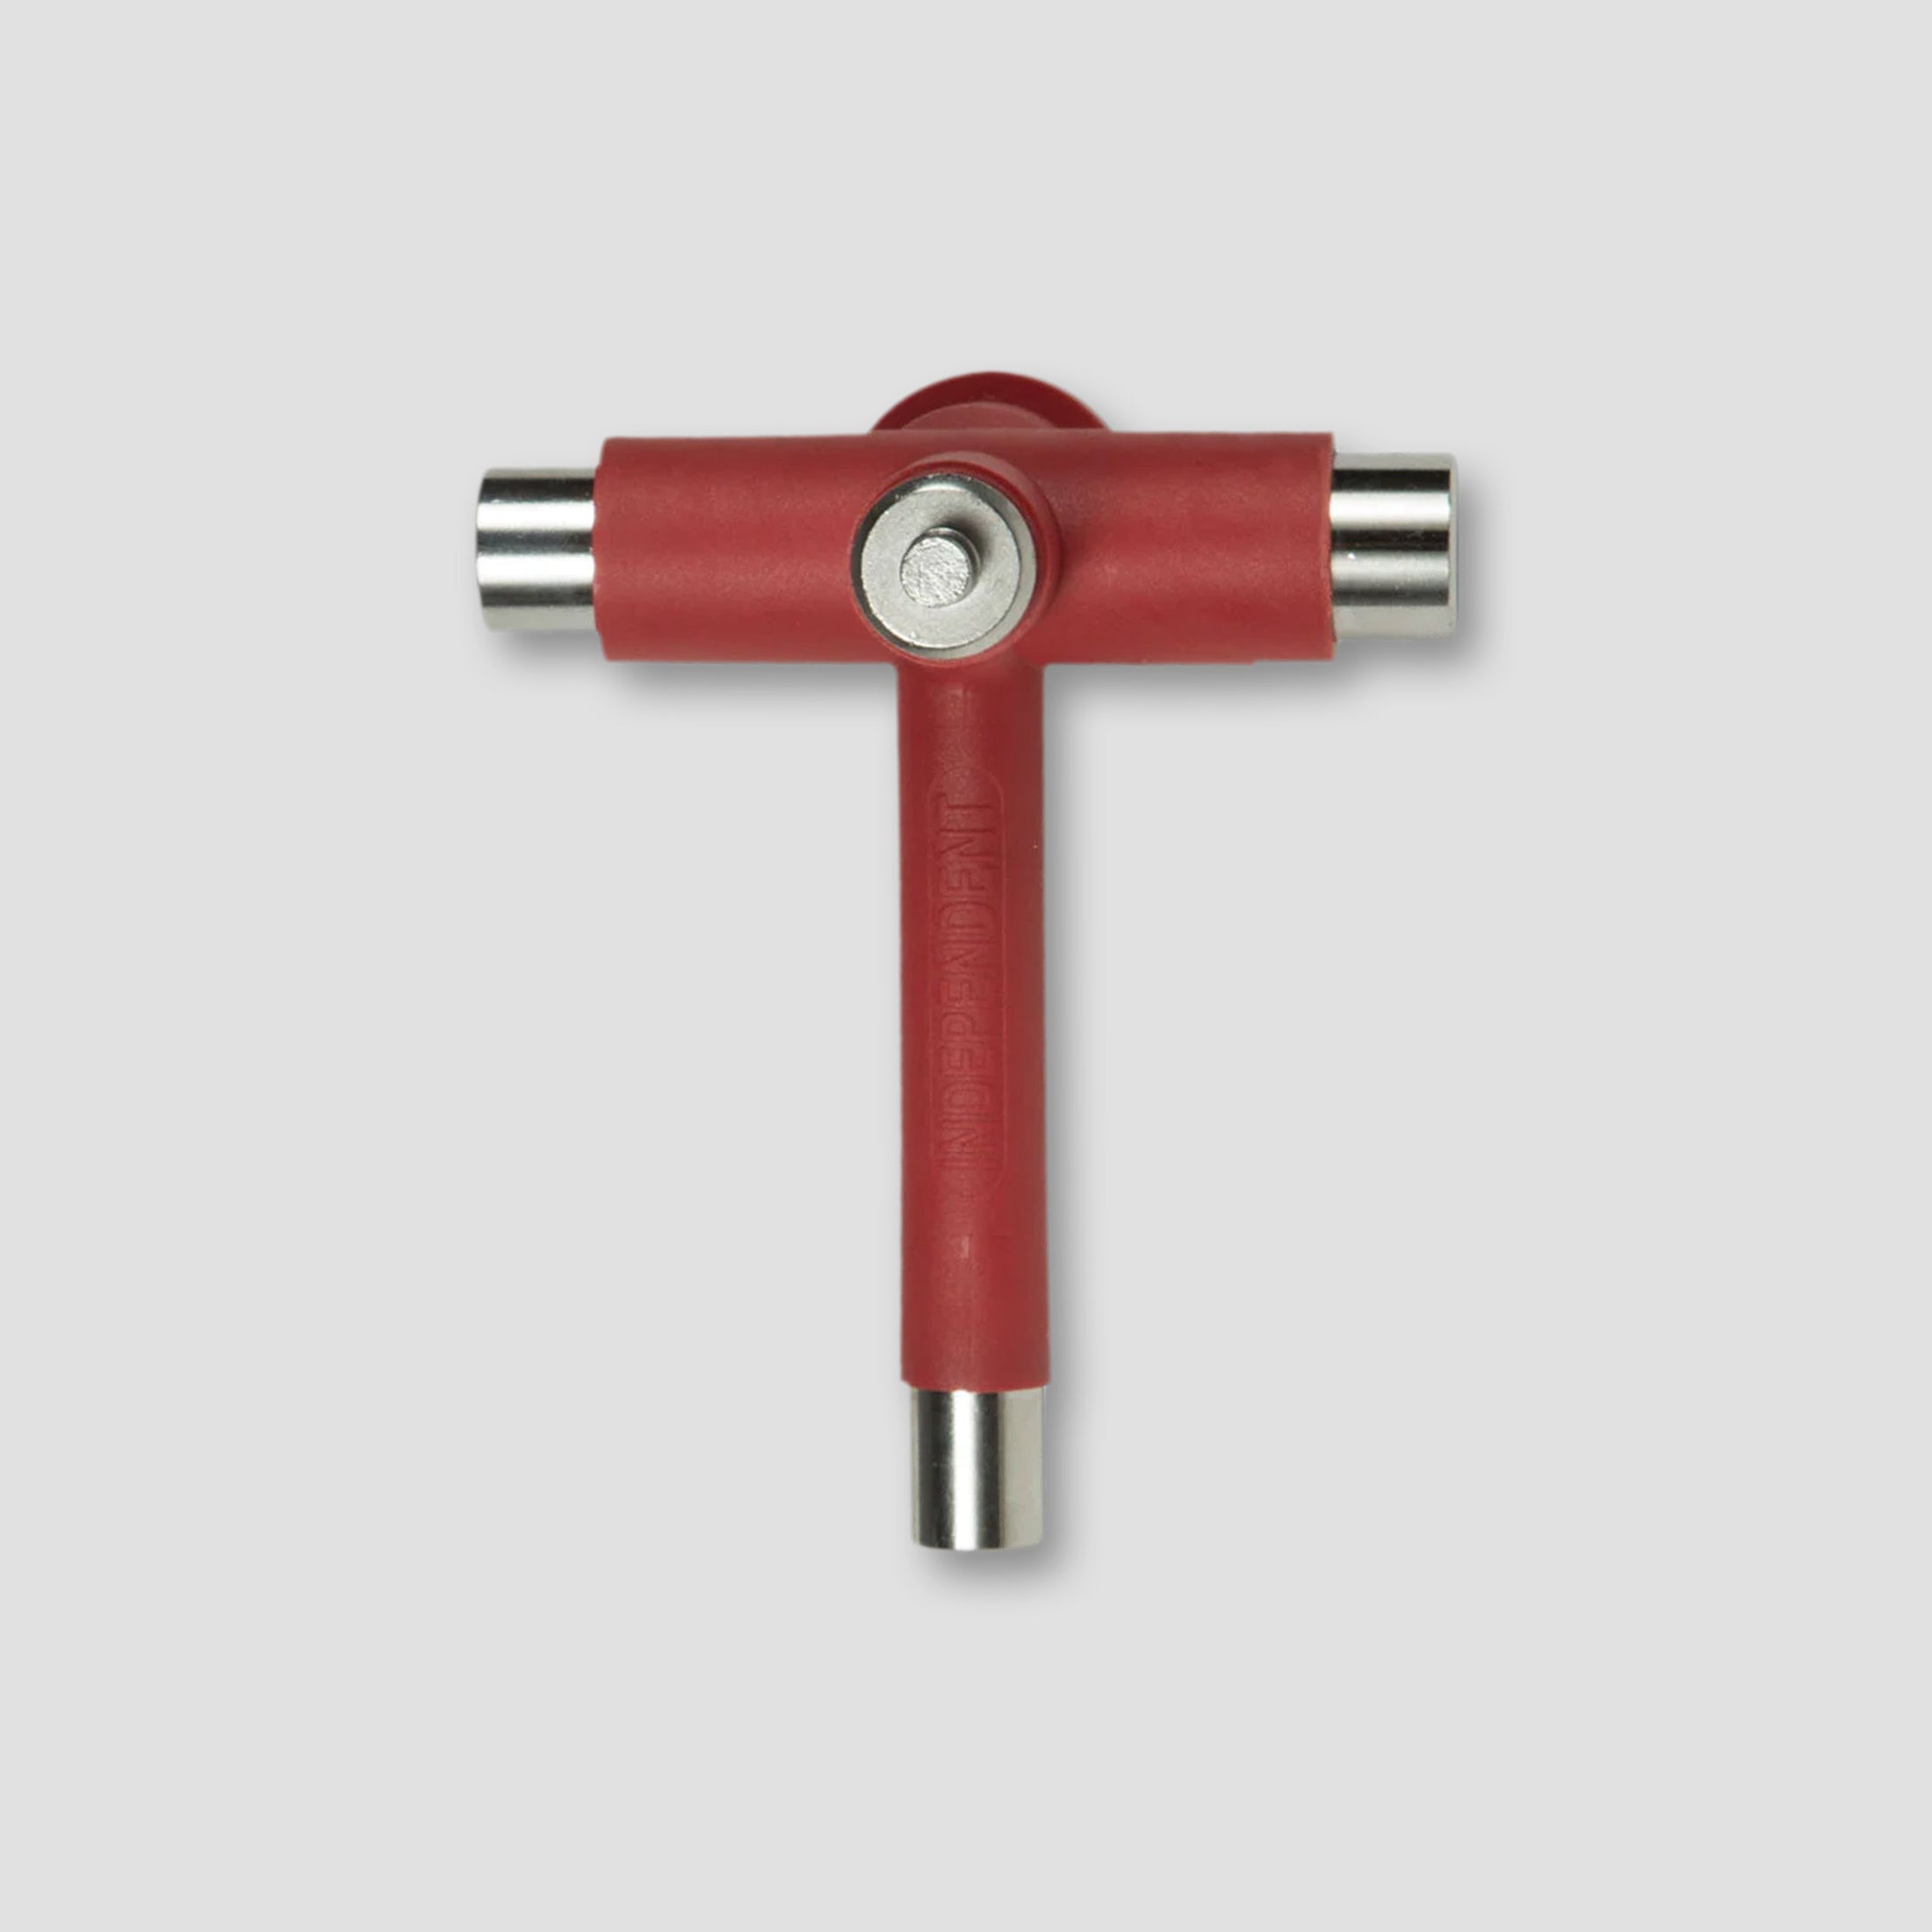 Independent Best Skate Tool Red